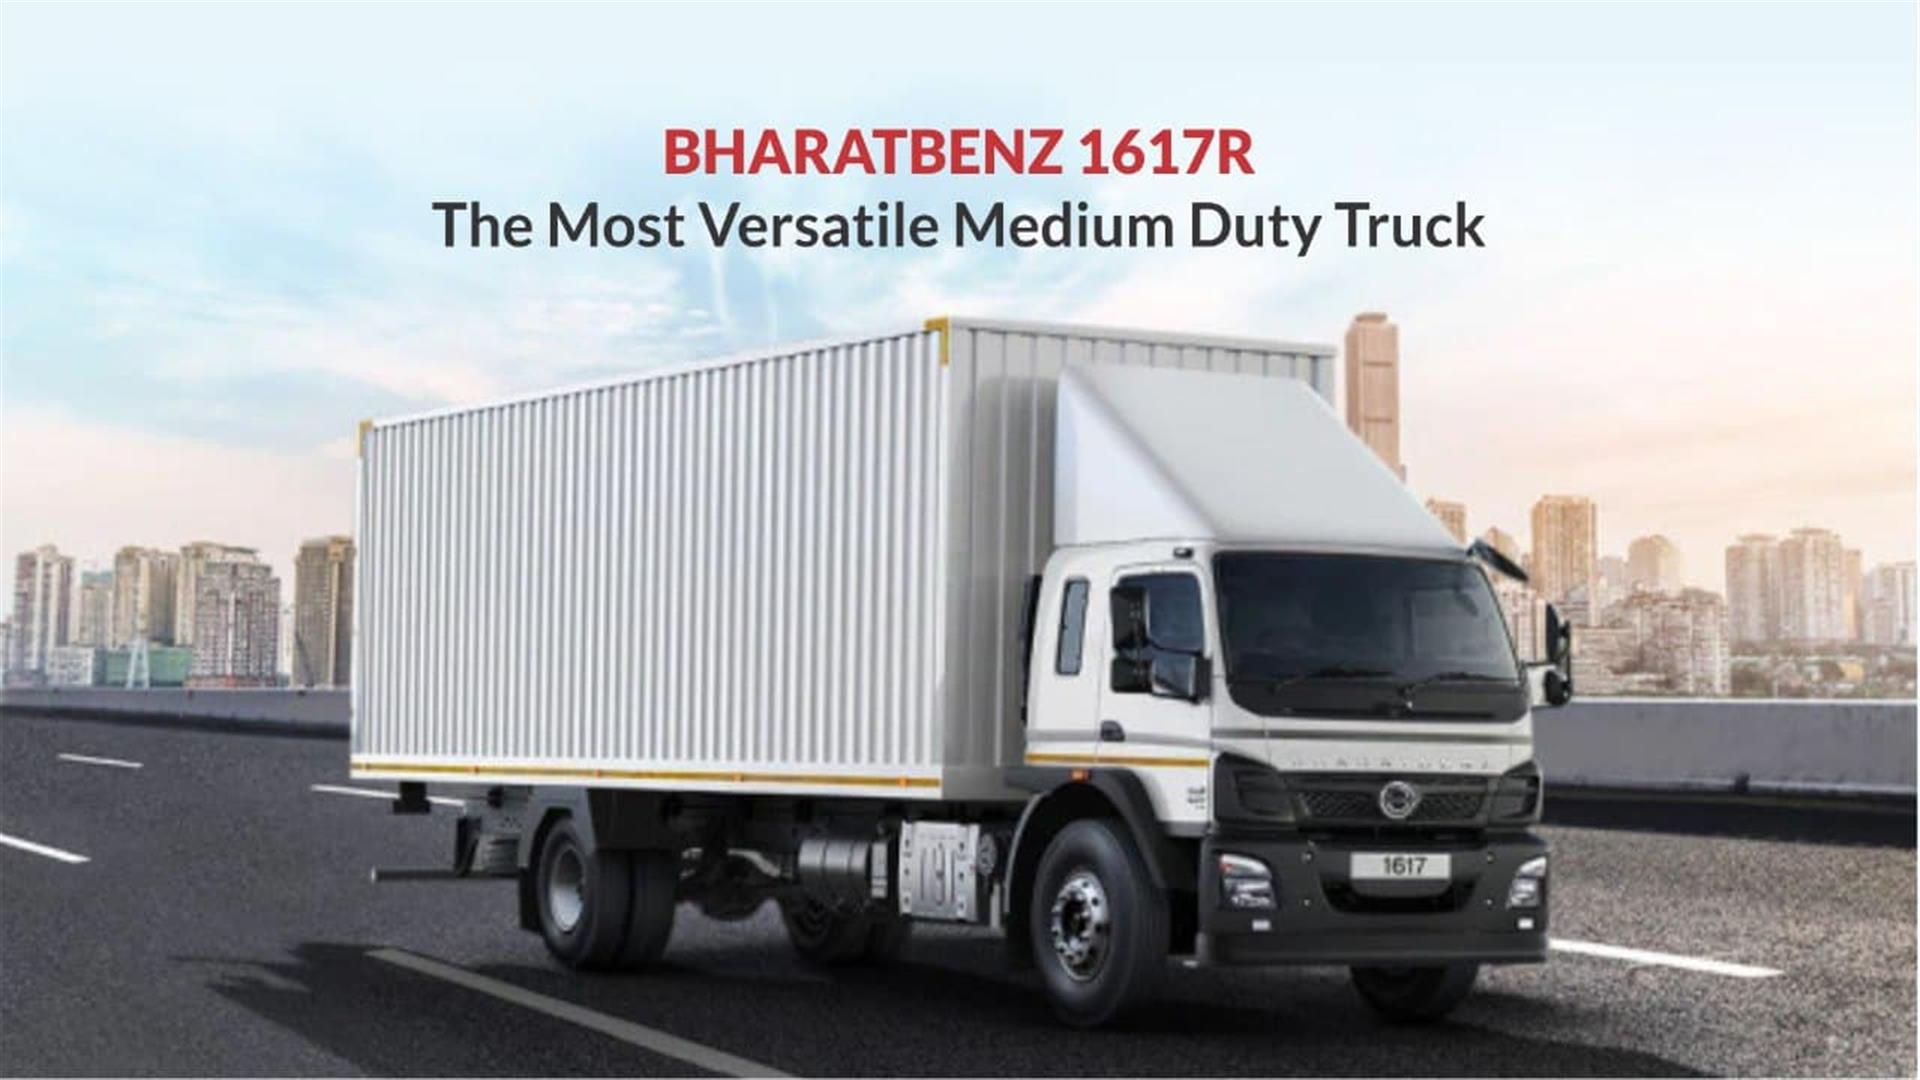 BharatBenz 1617R: The Most Versatile Medium Duty Truck To Fulfil All Your Needs